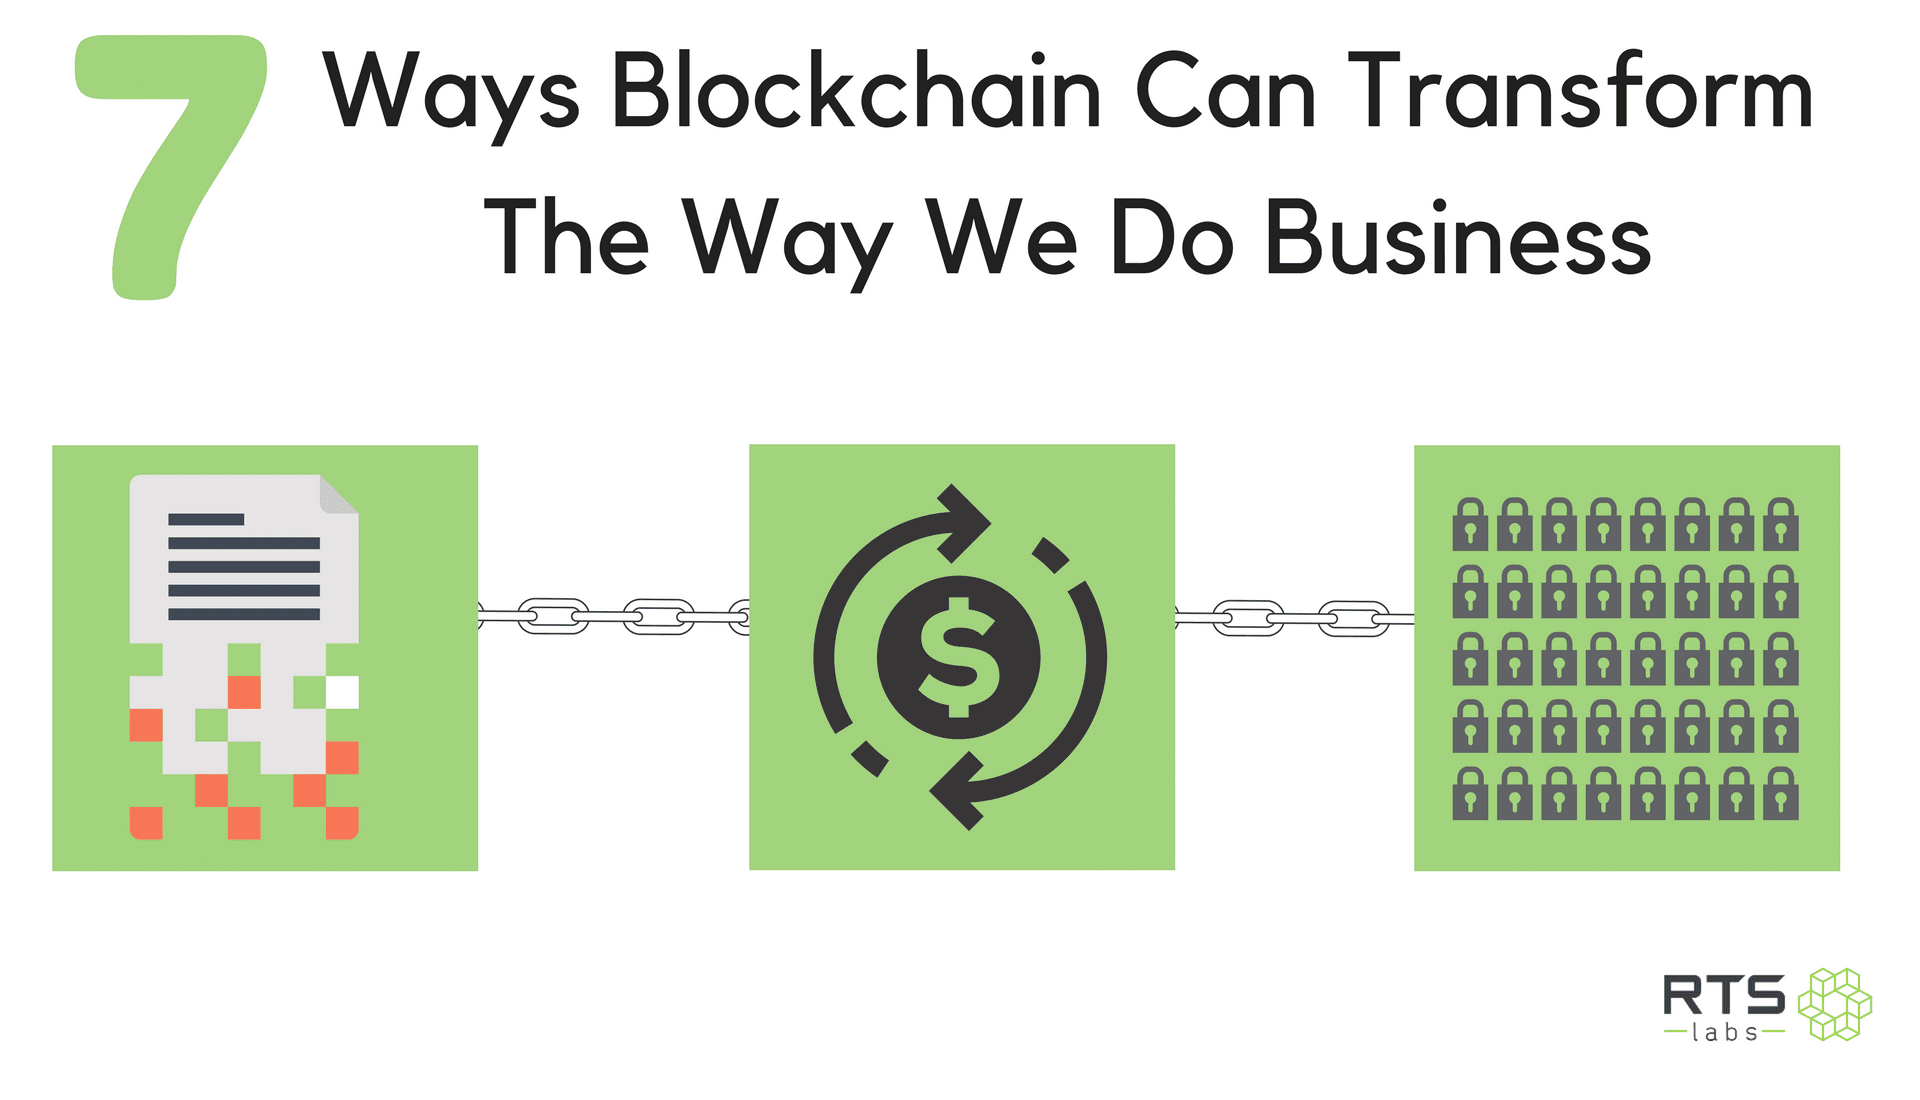 7 Ways Blockchain Can Transform the Way We Do Business